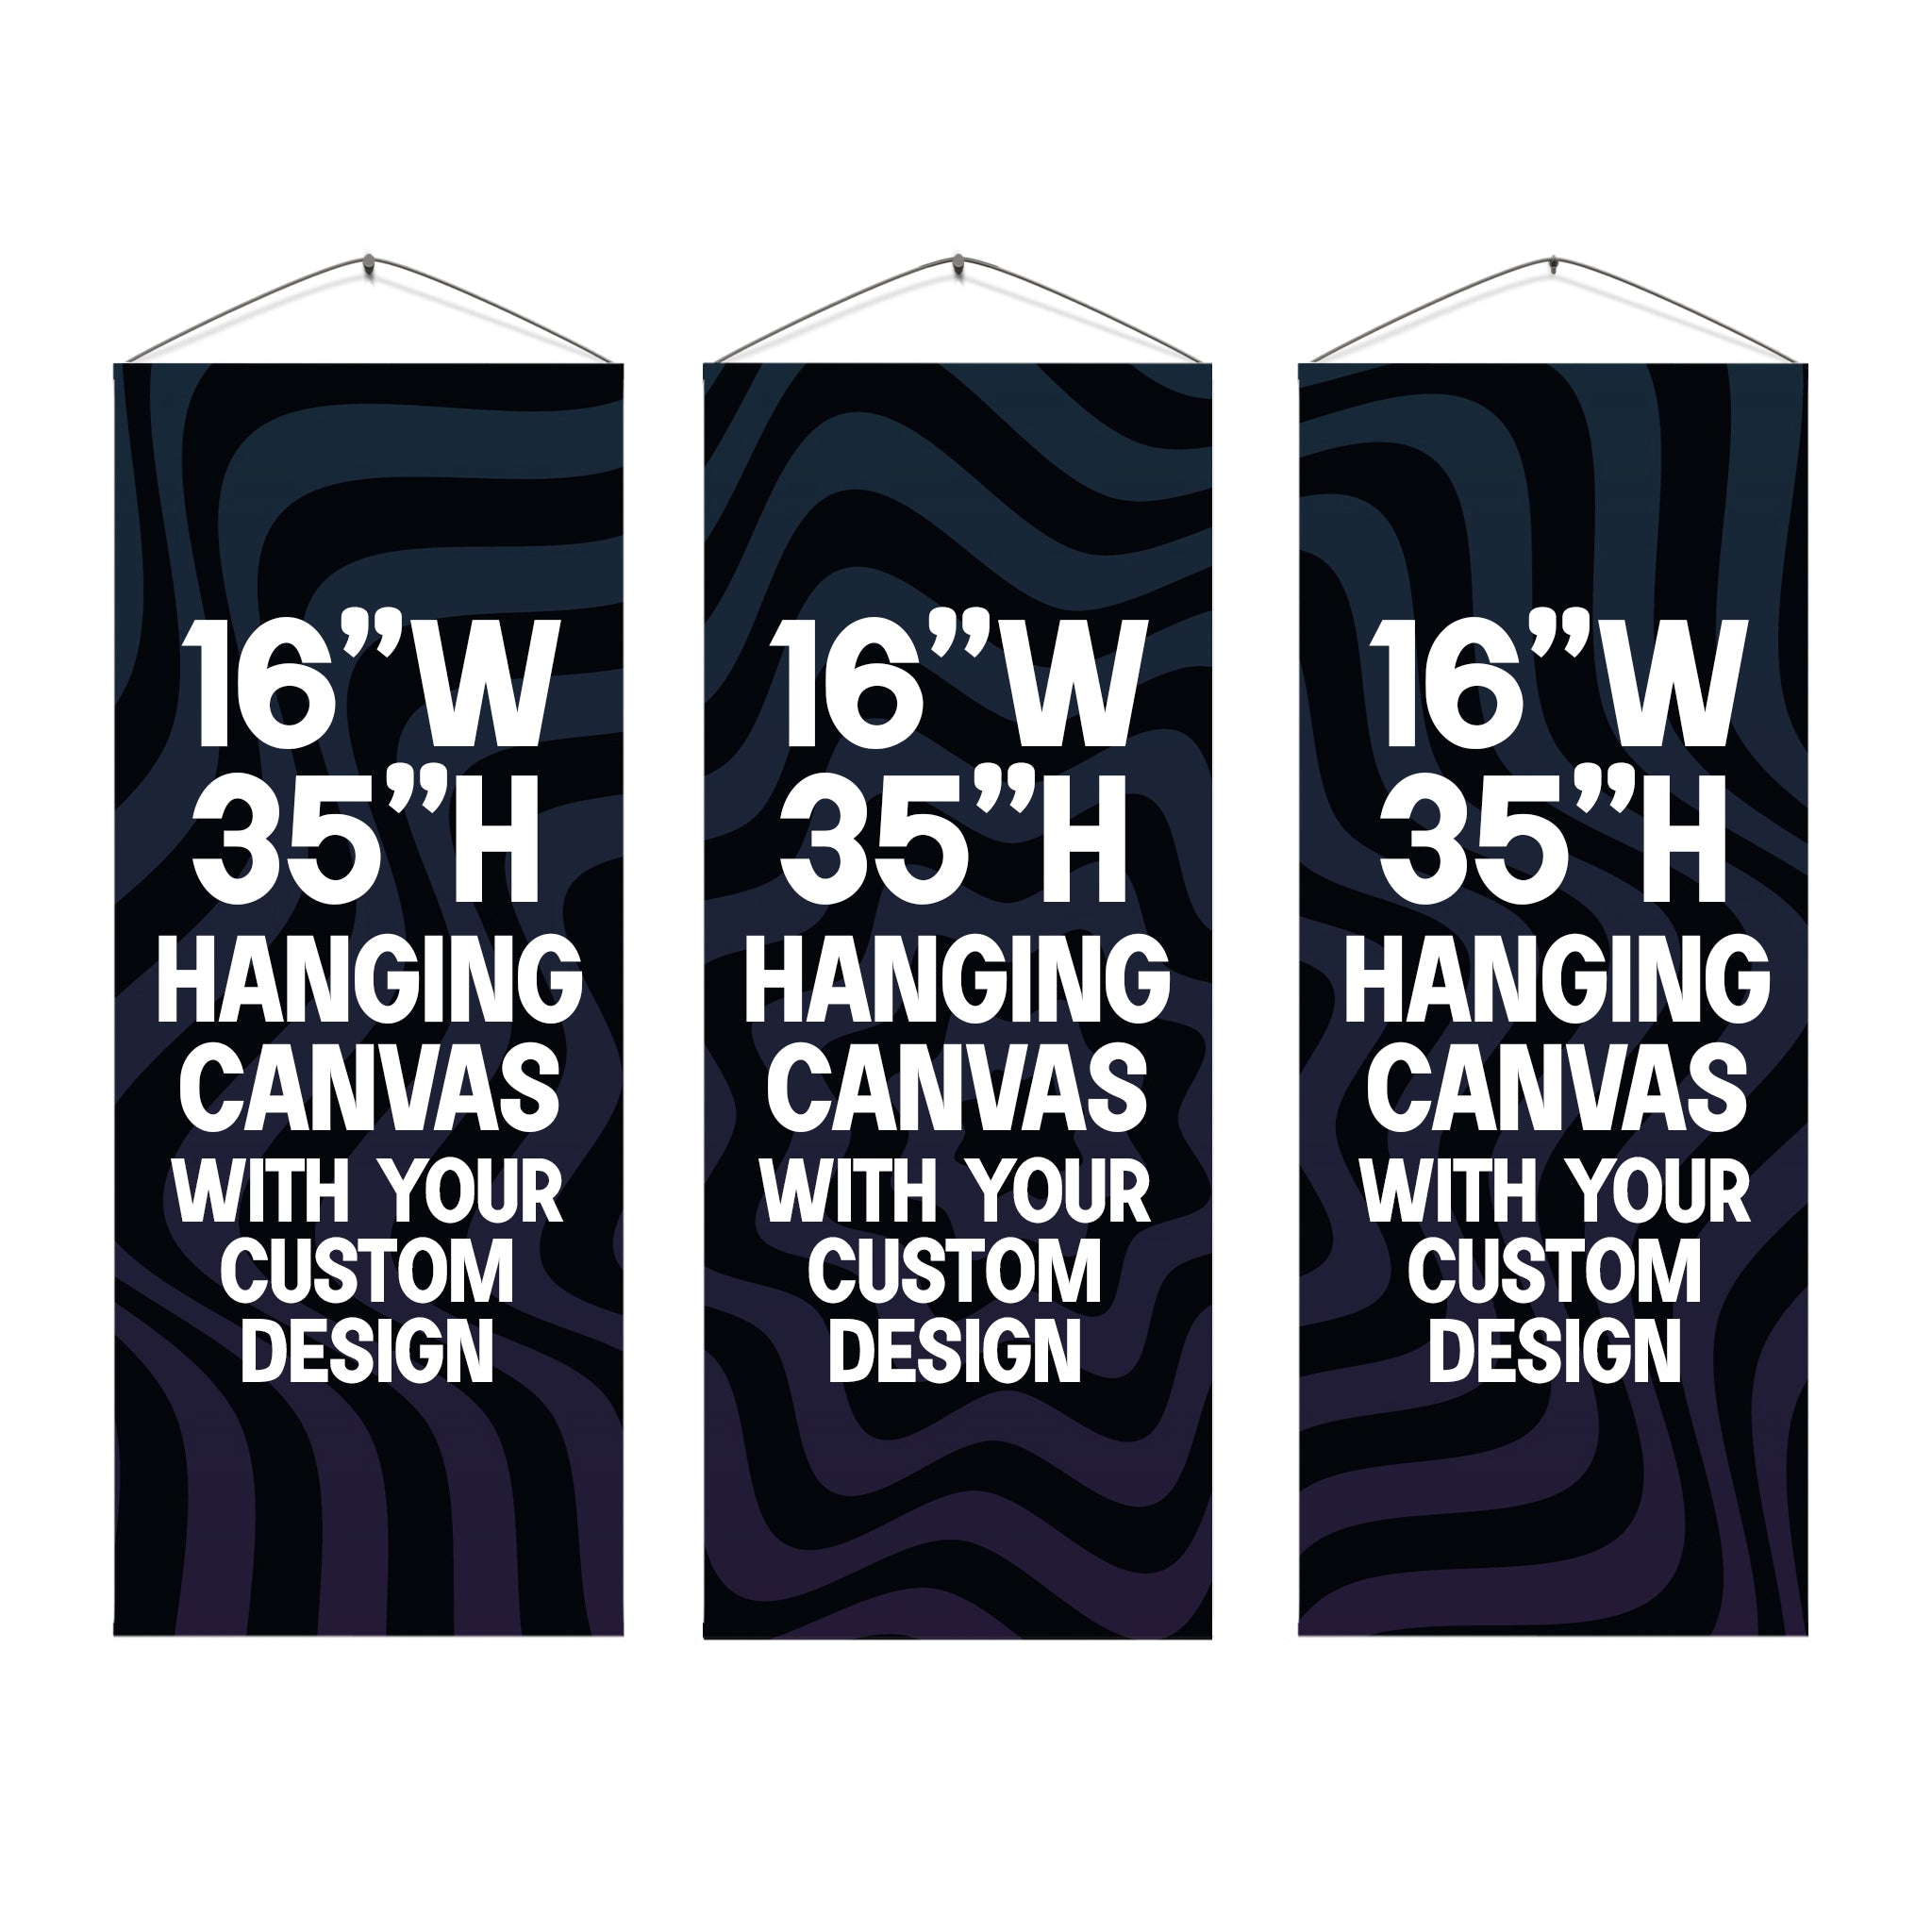 Hanging Canvas Set of 3 - Make Your Own